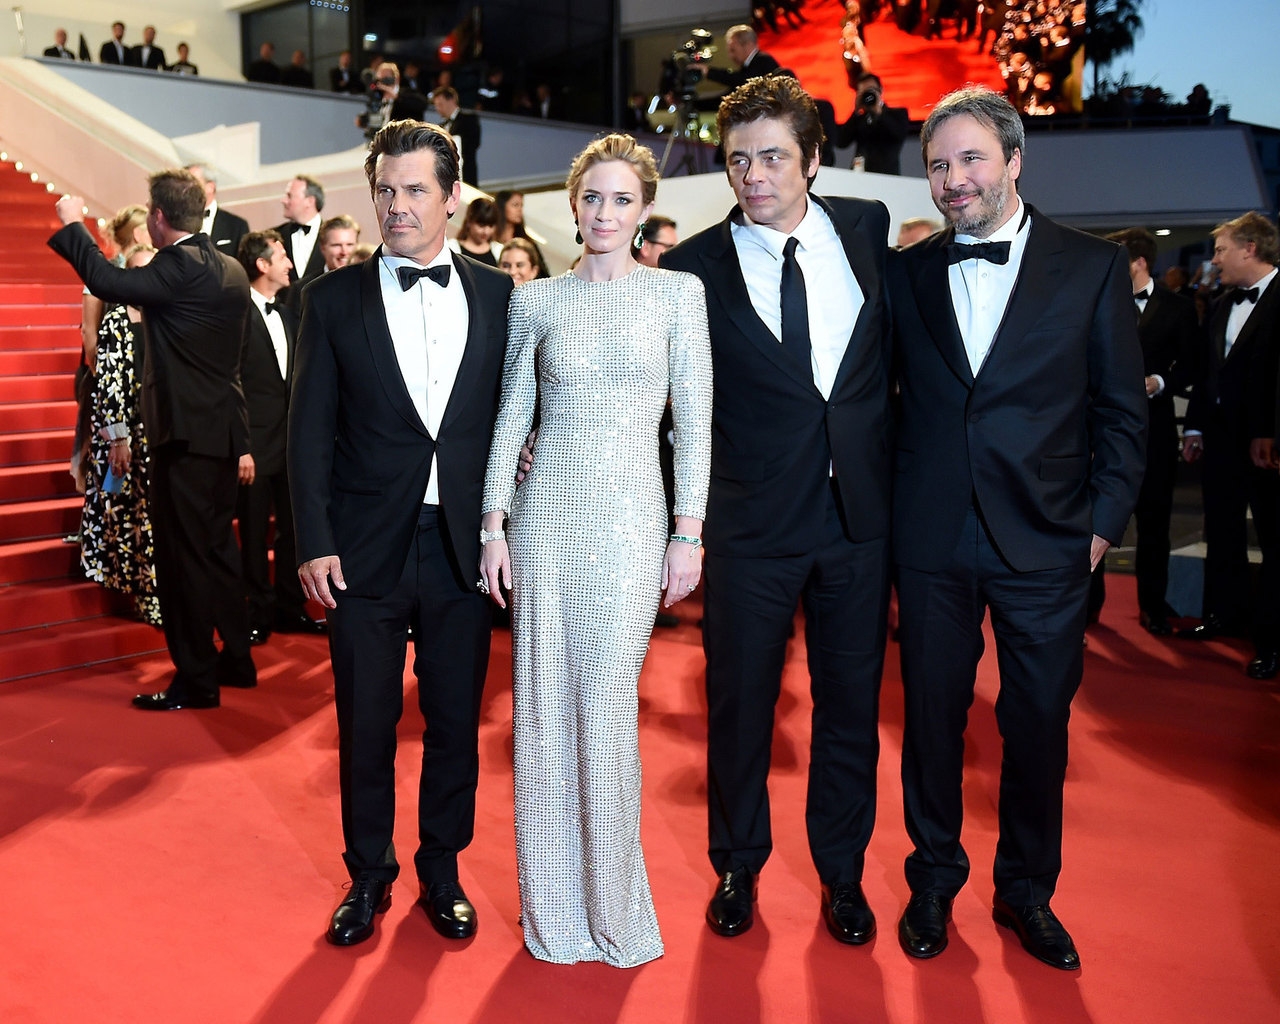 Sicario at Cannes for 1280 x 1024 resolution